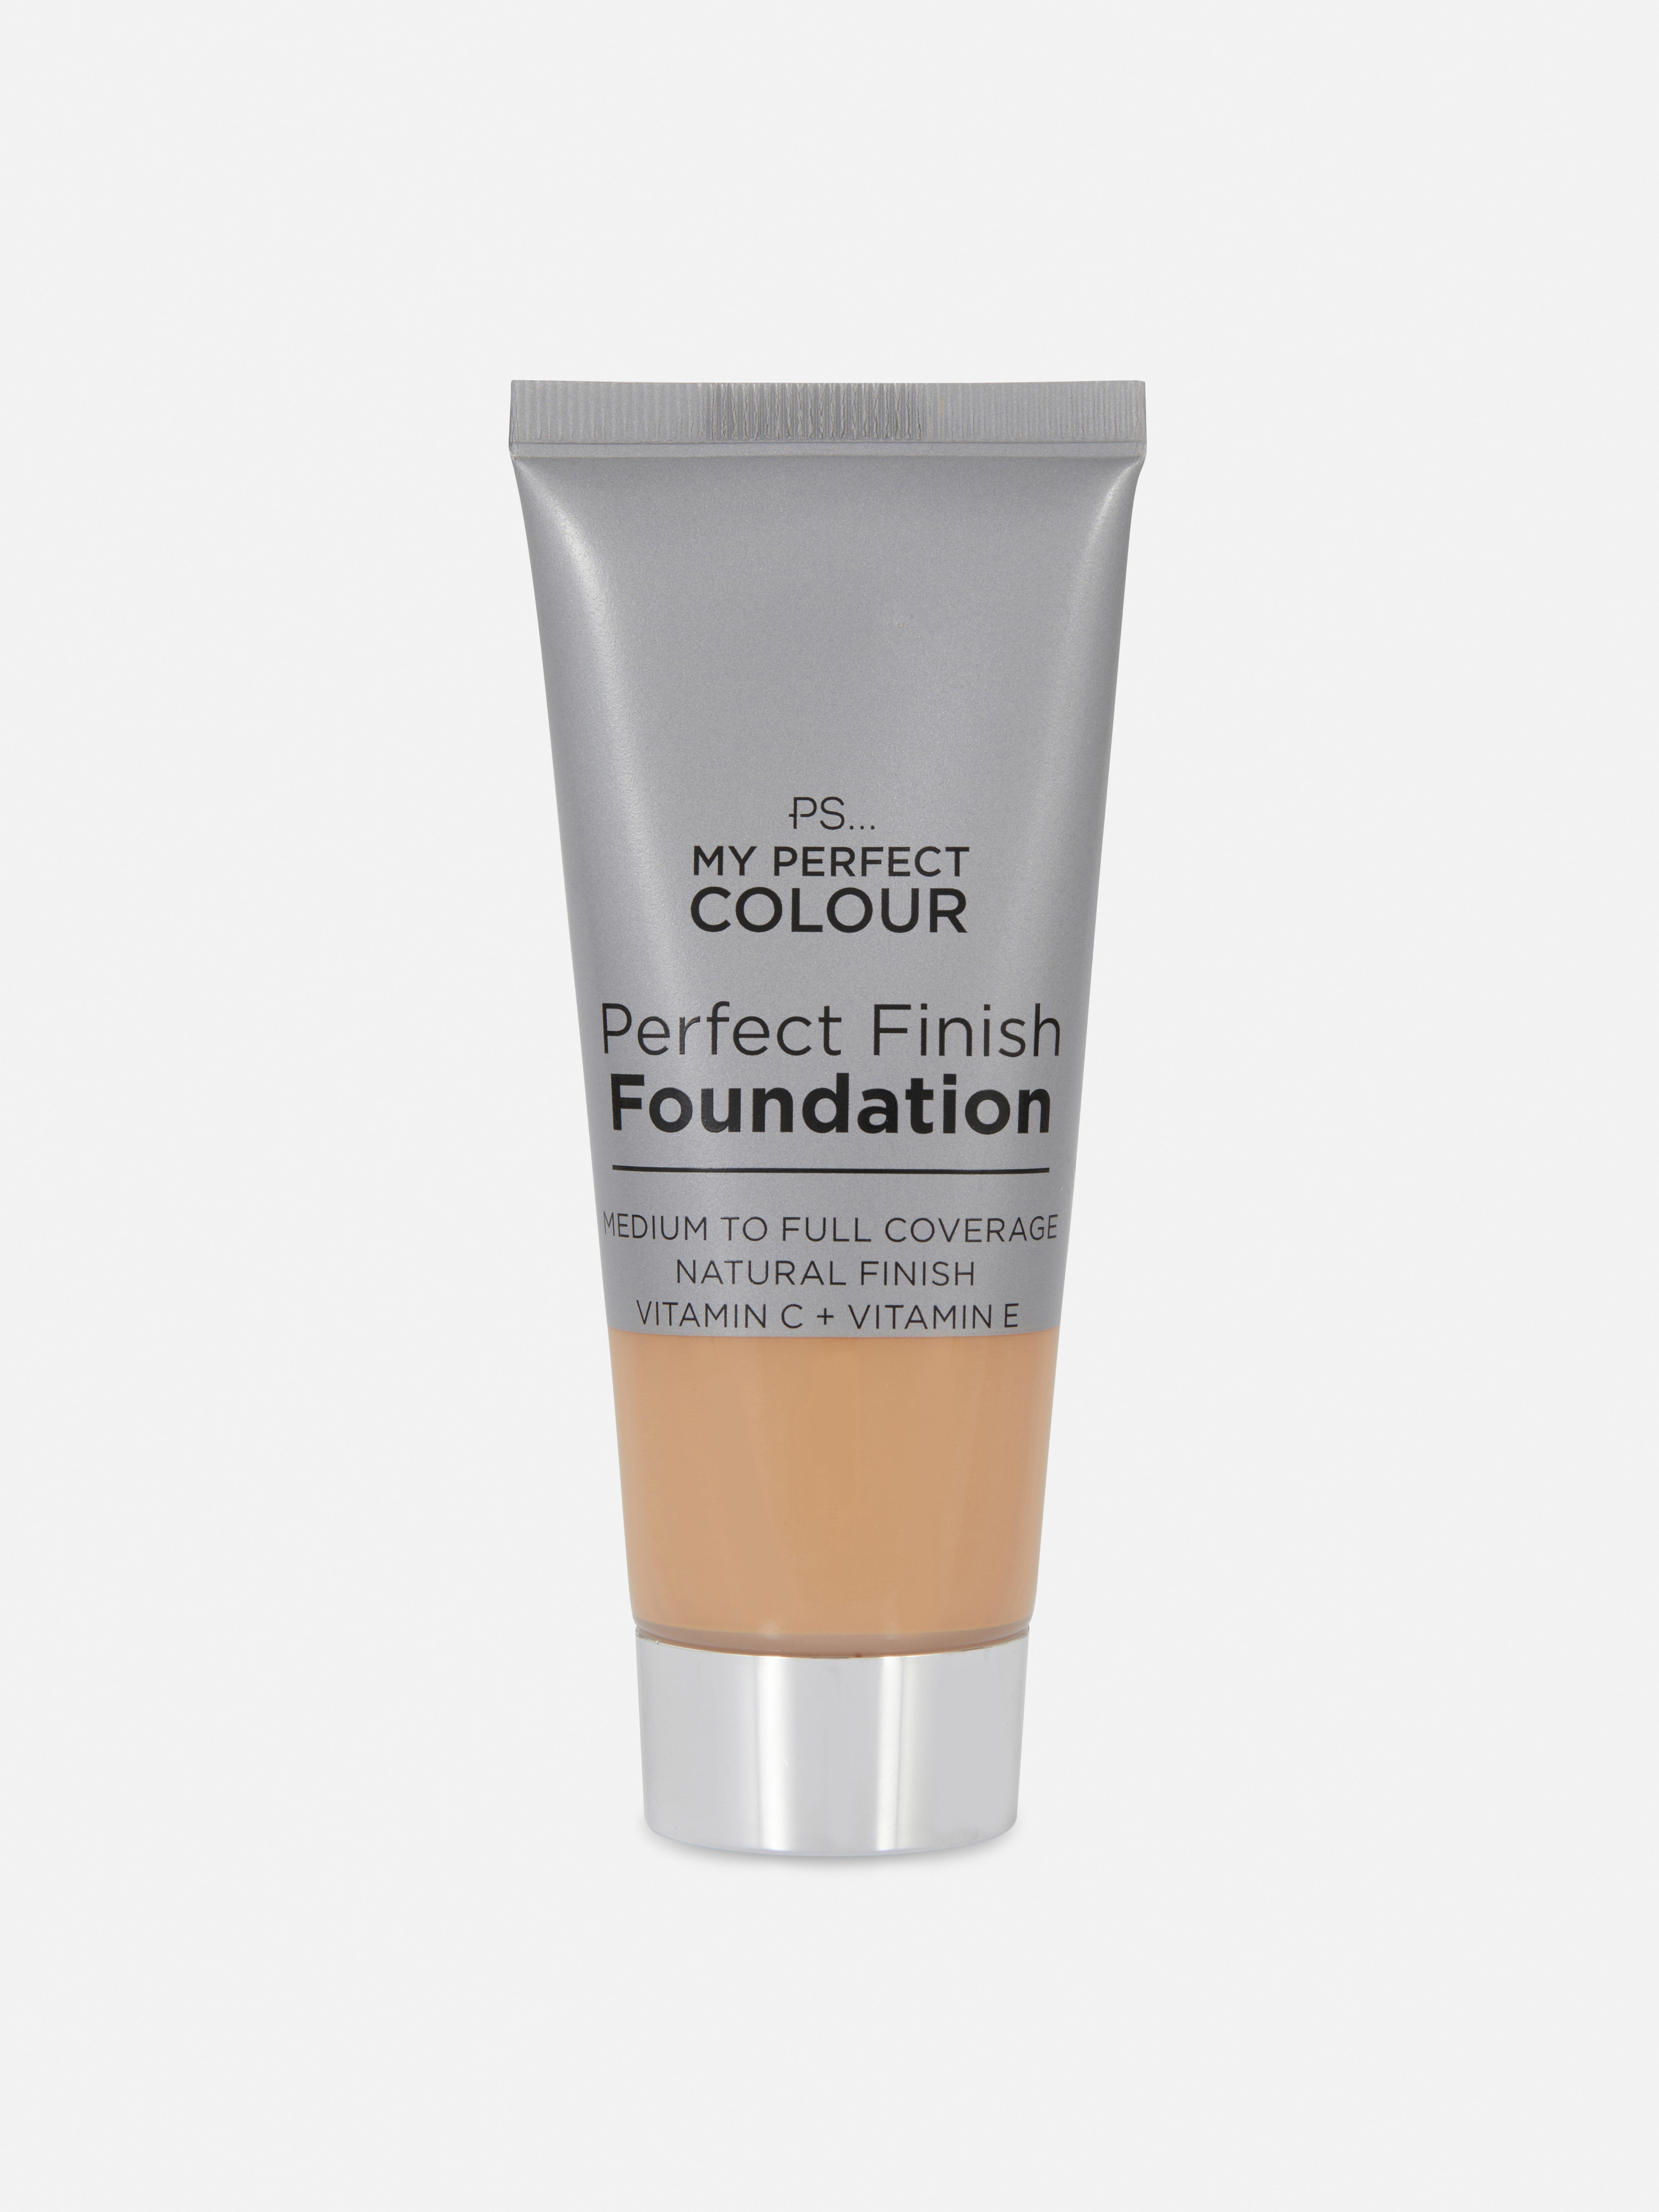 PS... My Perfect Colour Perfect Finish Foundation